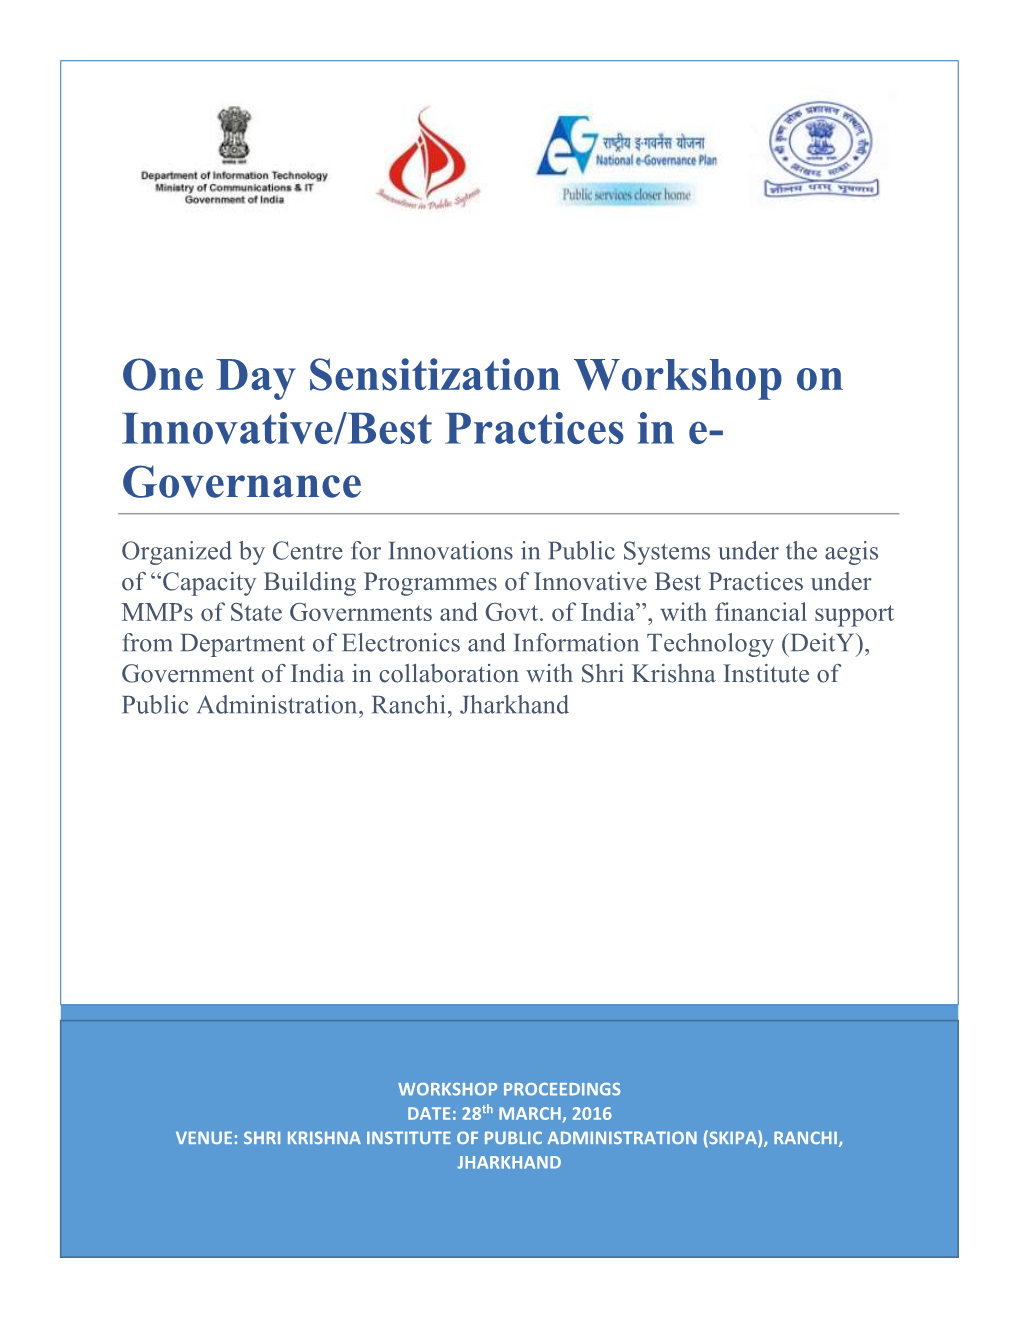 One Day Sensitization Workshop on Innovative/Best Practices in E